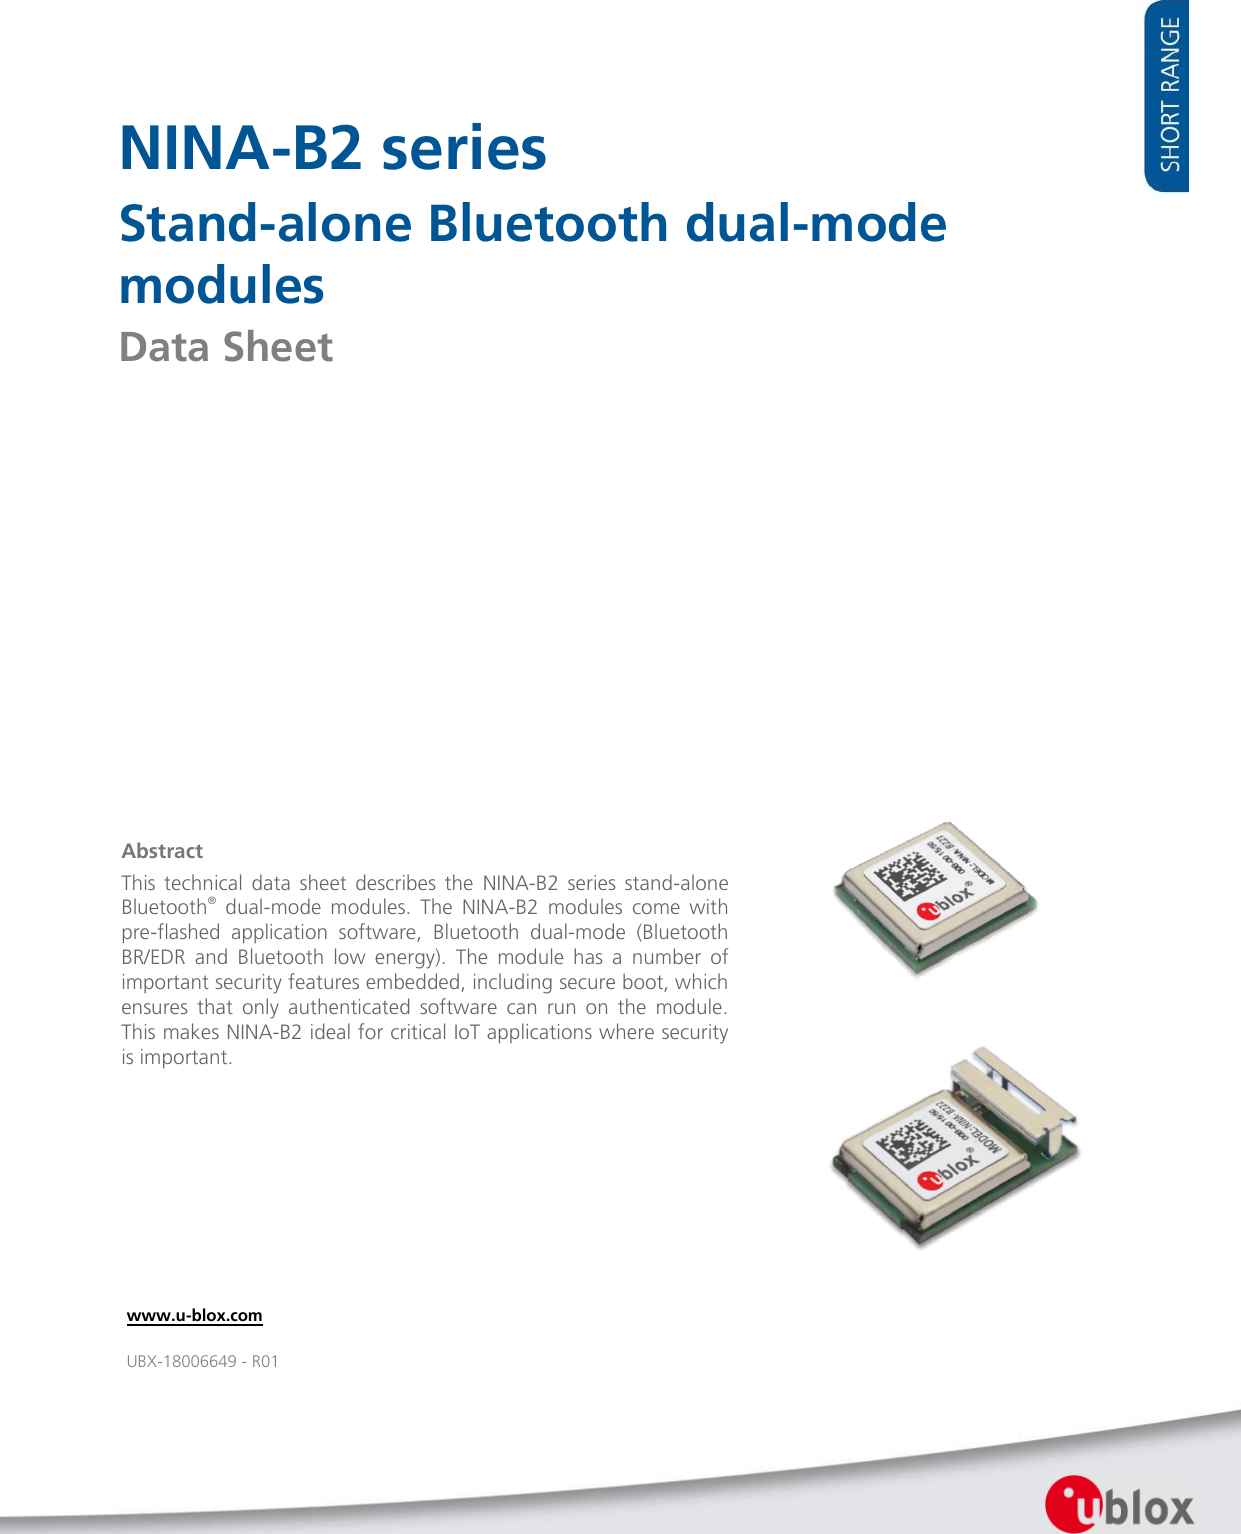        NINA-B2 series Stand-alone Bluetooth dual-mode modules Data Sheet                         www.u-blox.com UBX-18006649 - R01 Abstract This  technical  data  sheet  describes  the  NINA-B2  series  stand-alone Bluetooth®  dual-mode  modules.  The  NINA-B2  modules  come  with pre-flashed  application  software,  Bluetooth  dual-mode  (Bluetooth BR/EDR  and  Bluetooth  low  energy).  The  module  has  a  number  of important security features embedded, including secure boot, which ensures  that  only  authenticated  software  can  run  on  the  module. This makes NINA-B2 ideal for critical IoT applications where security is important.   